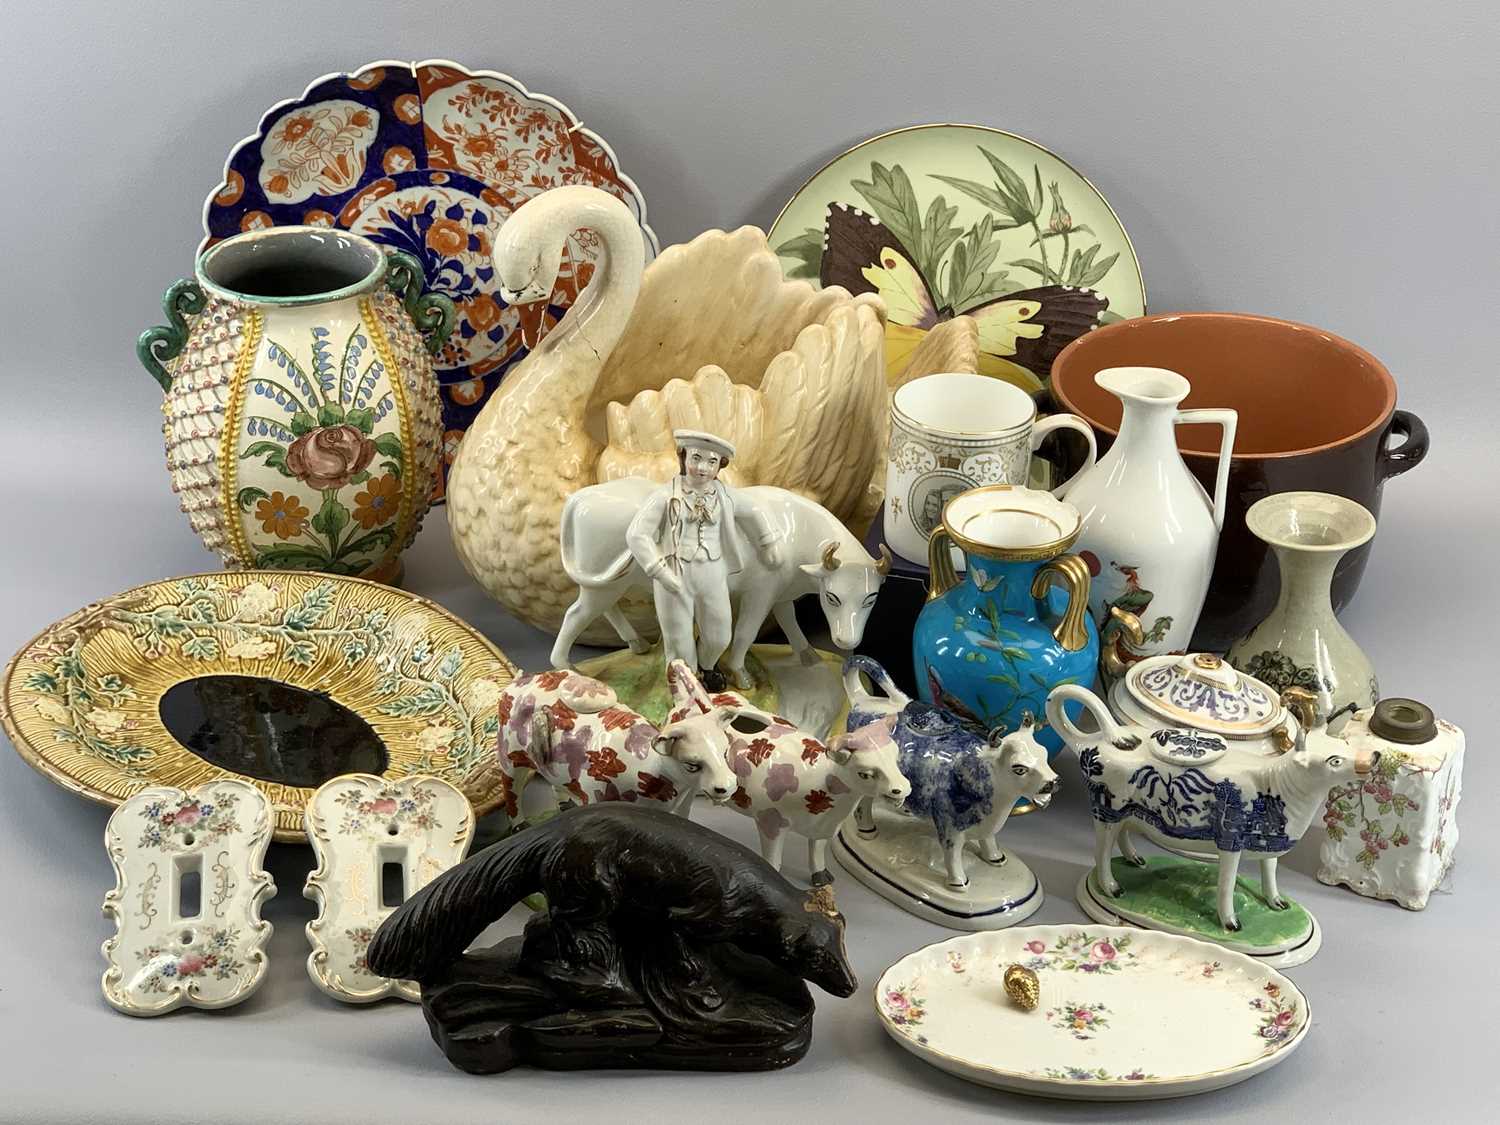 CHINA ASSORTMENT - to include Majolica type plate, cow creamers, a swan planter, ETC